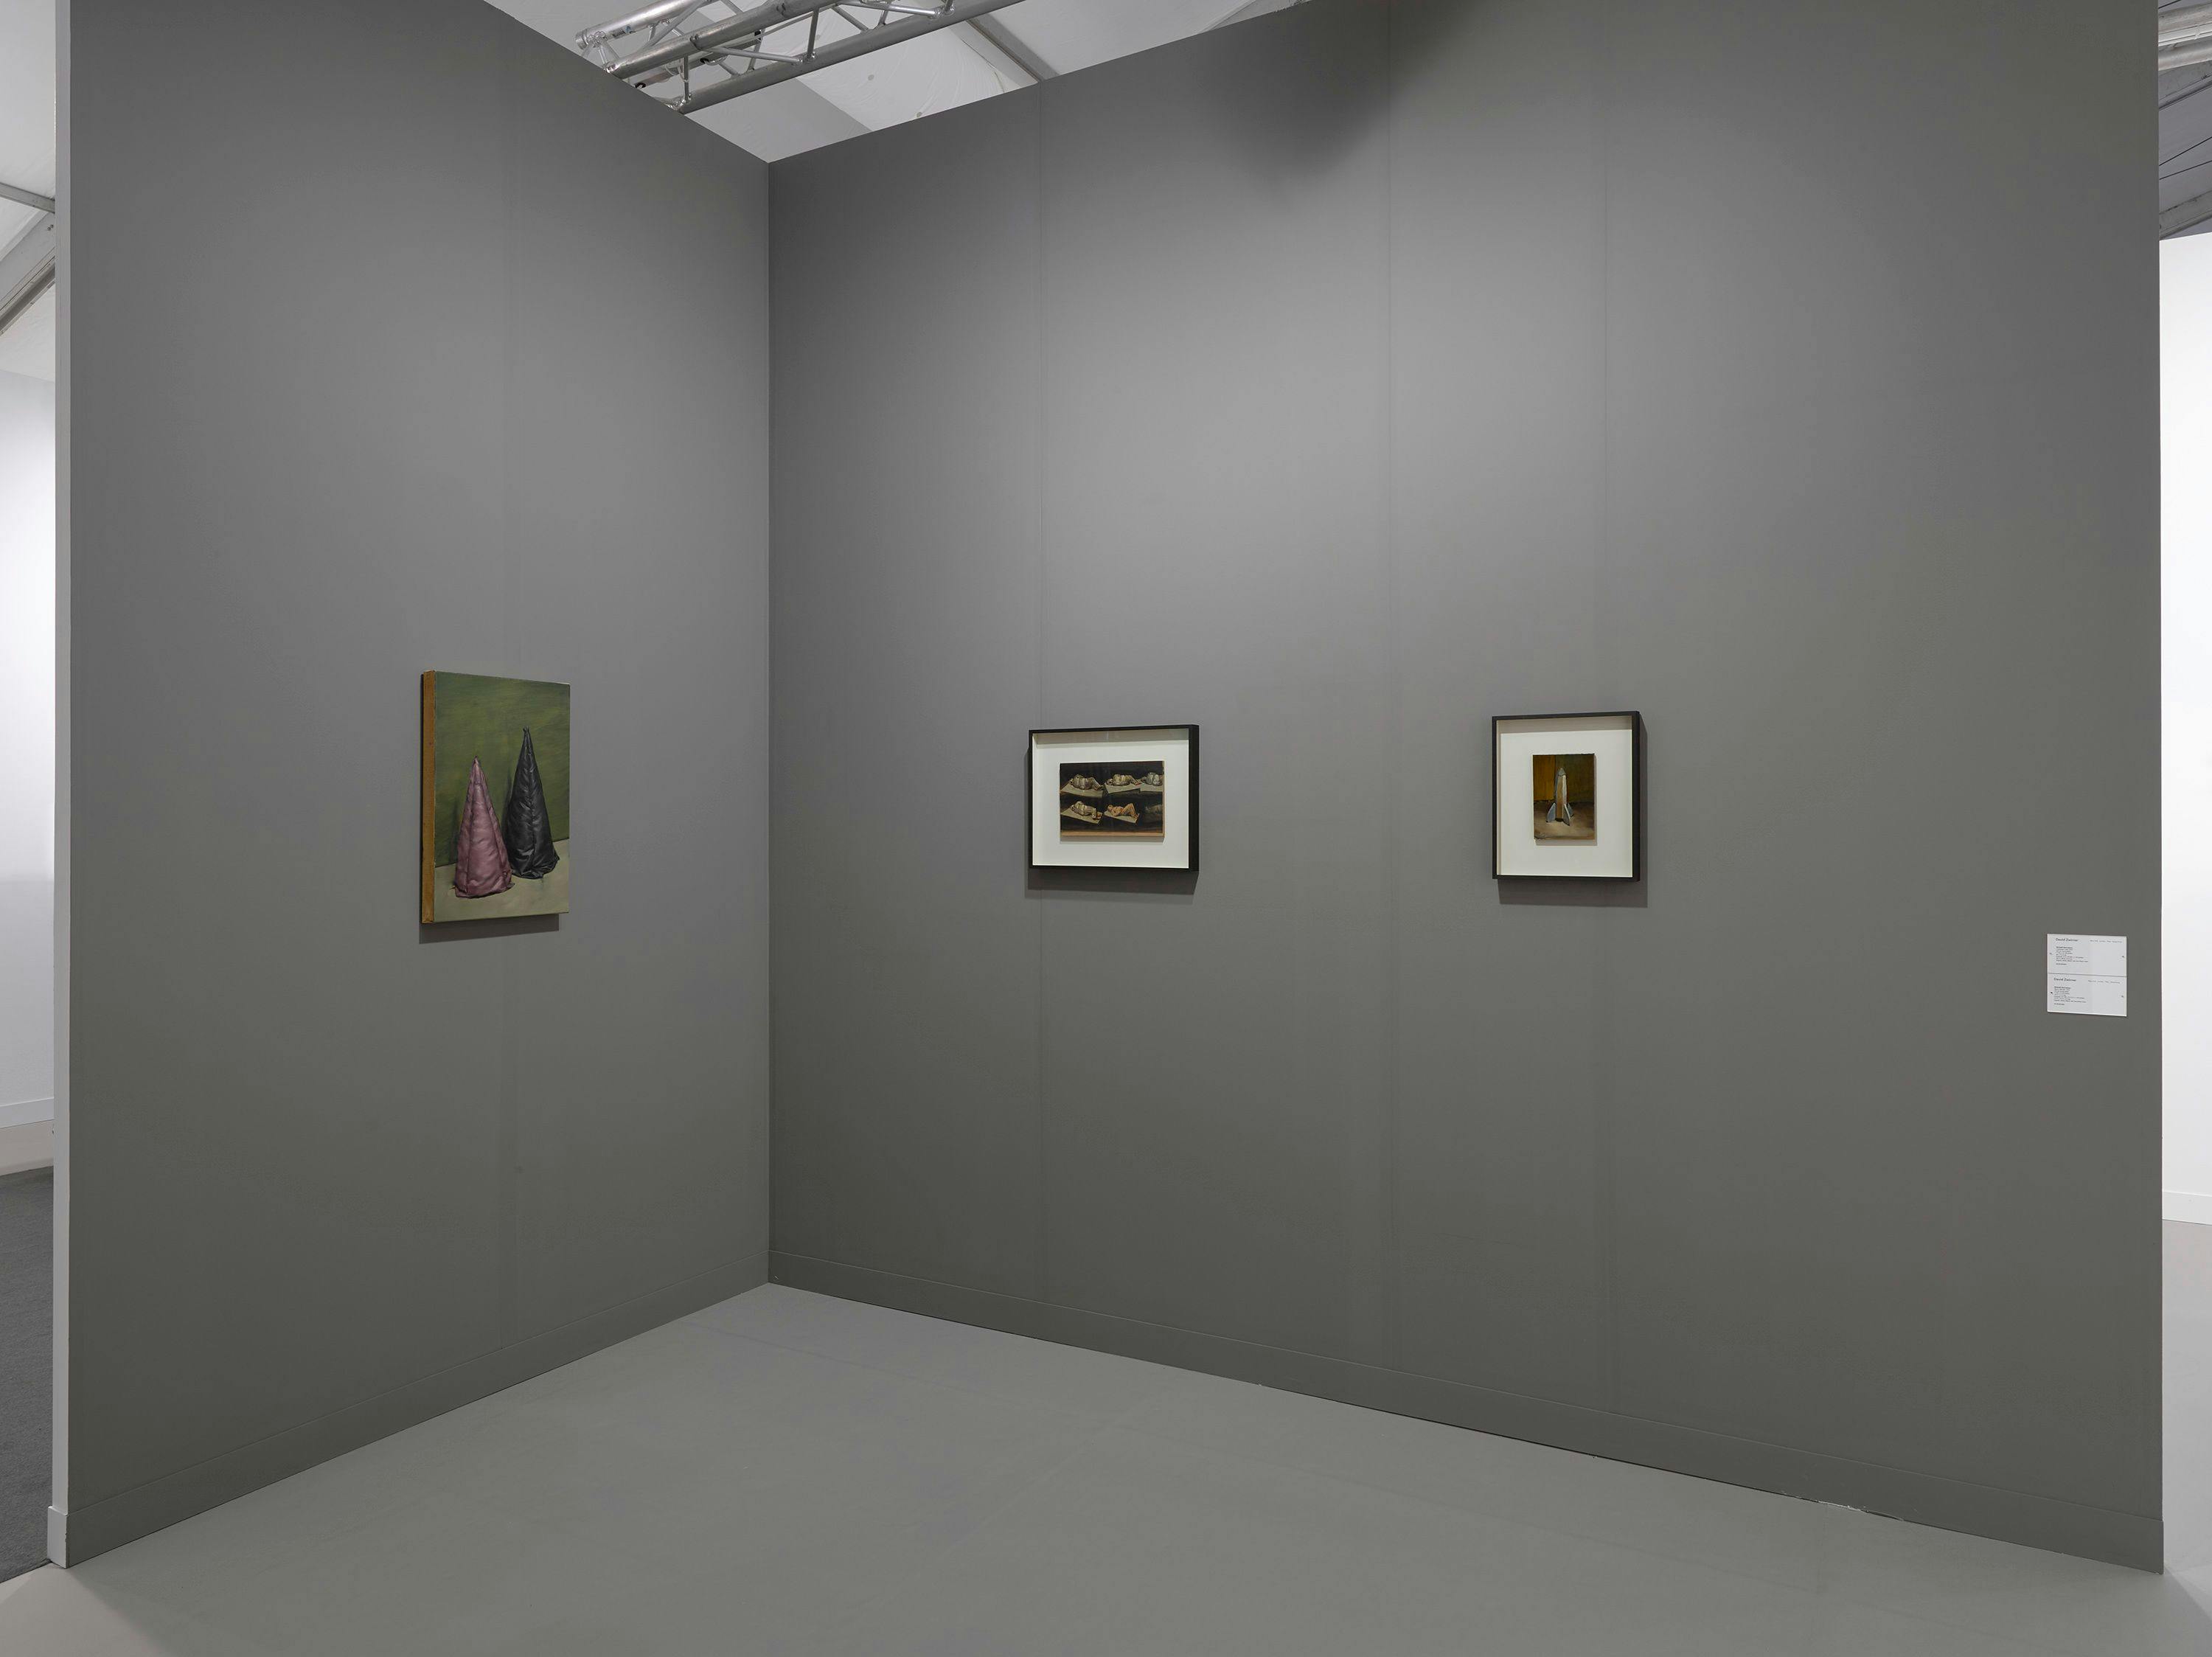 An installation view of David Zwirner gallery’s booth at Frieze London, dated 2021.